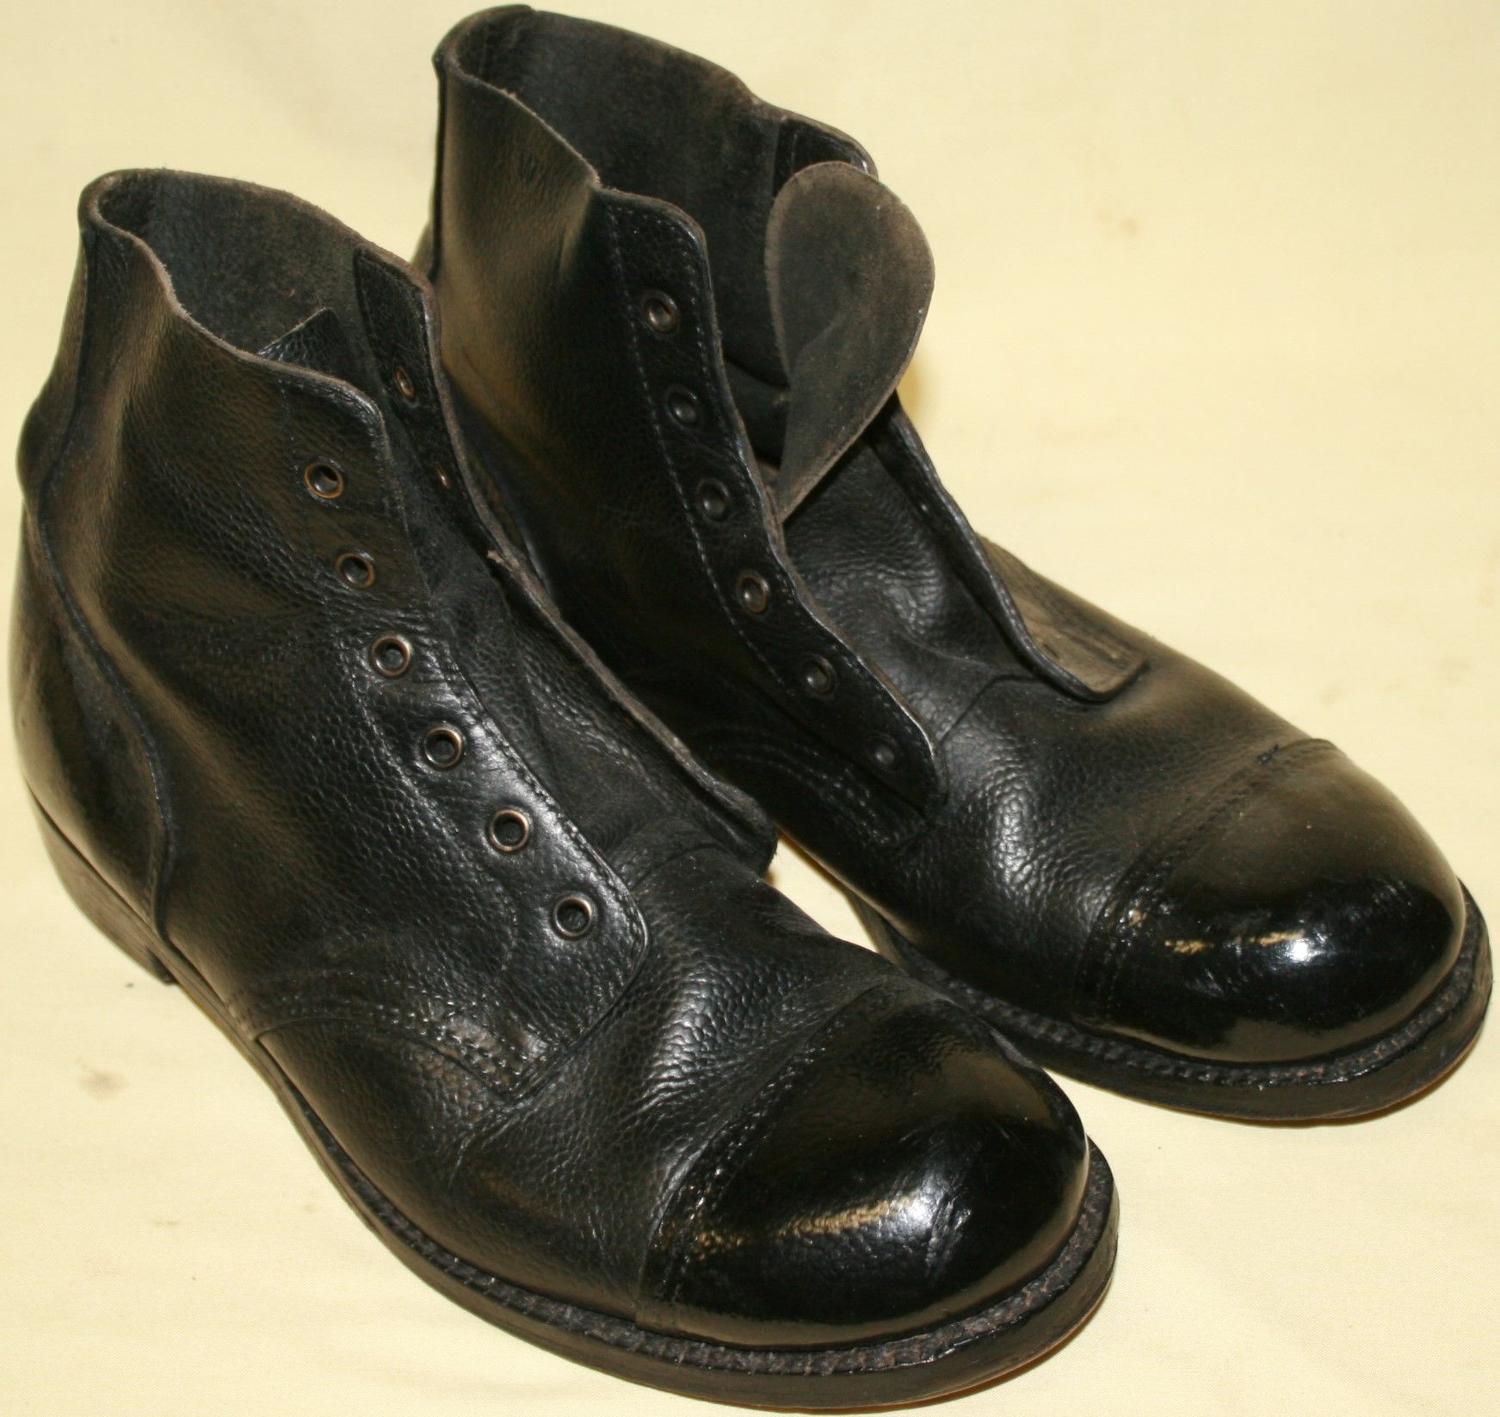 A PAIR OF SIZE 8M HOB NAIL BOOTS 1954 DATED